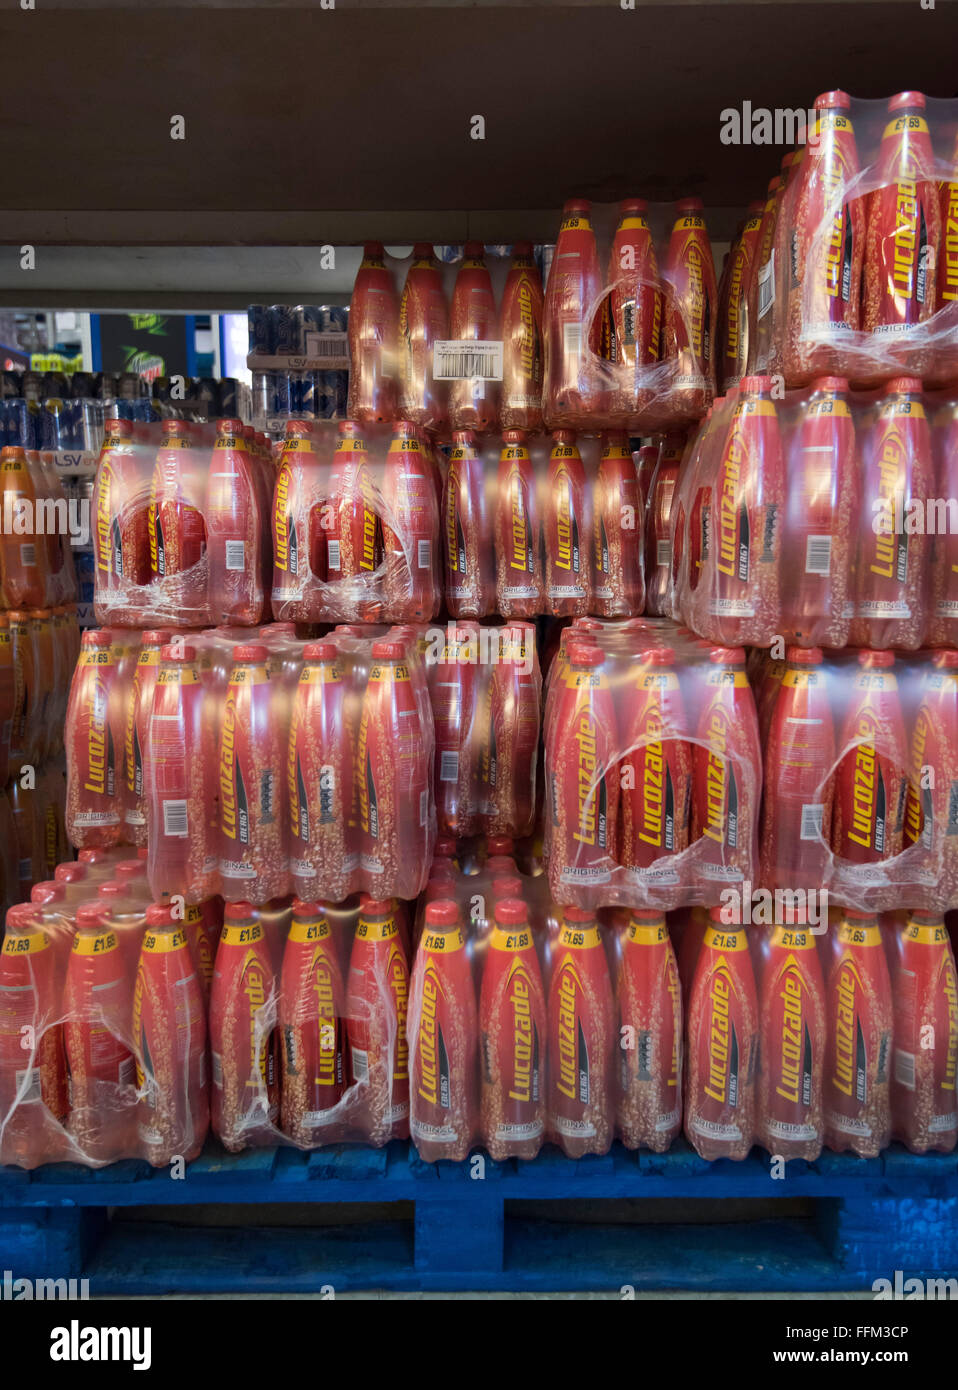 Lucozade energy drinks for sale in a warehouse. Stock Photo